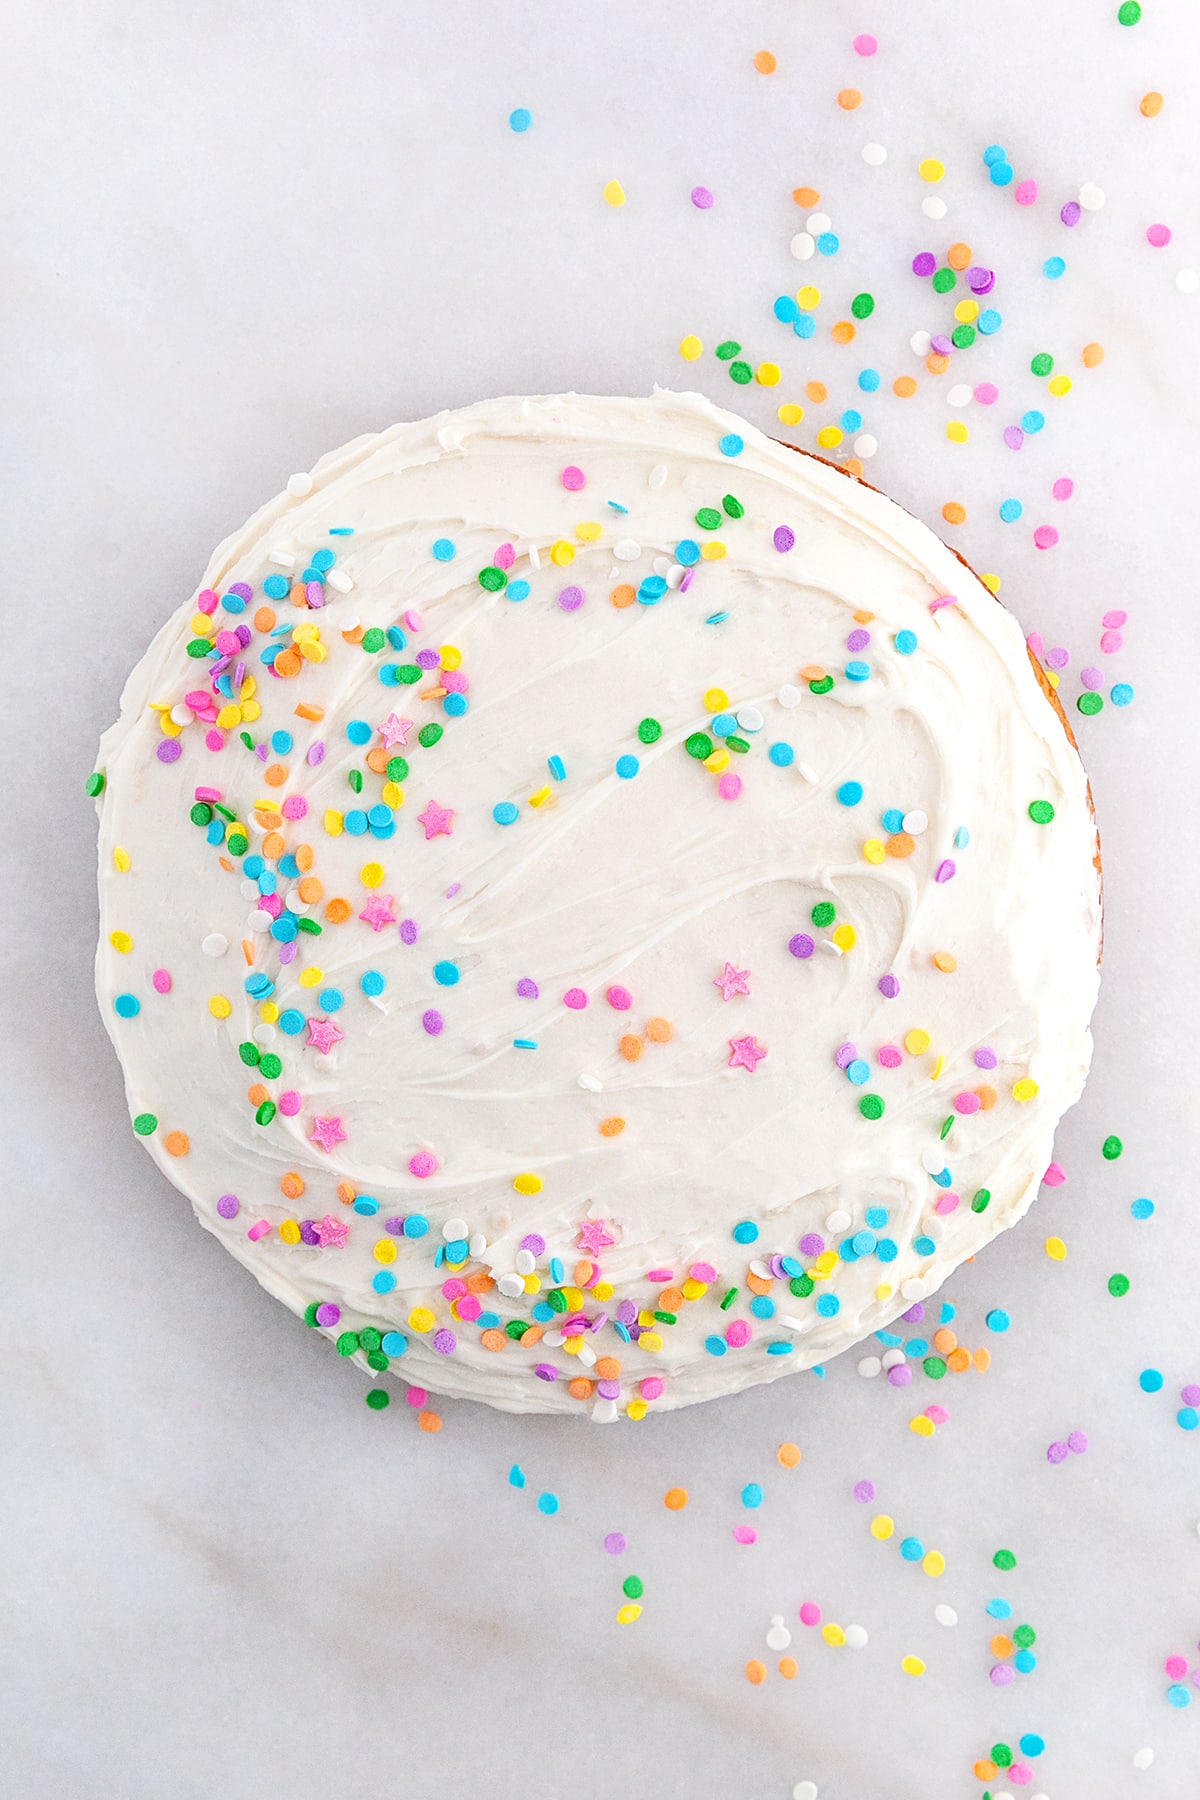 Round Funfetti Cake Iced and confetti sprinkles on top. 